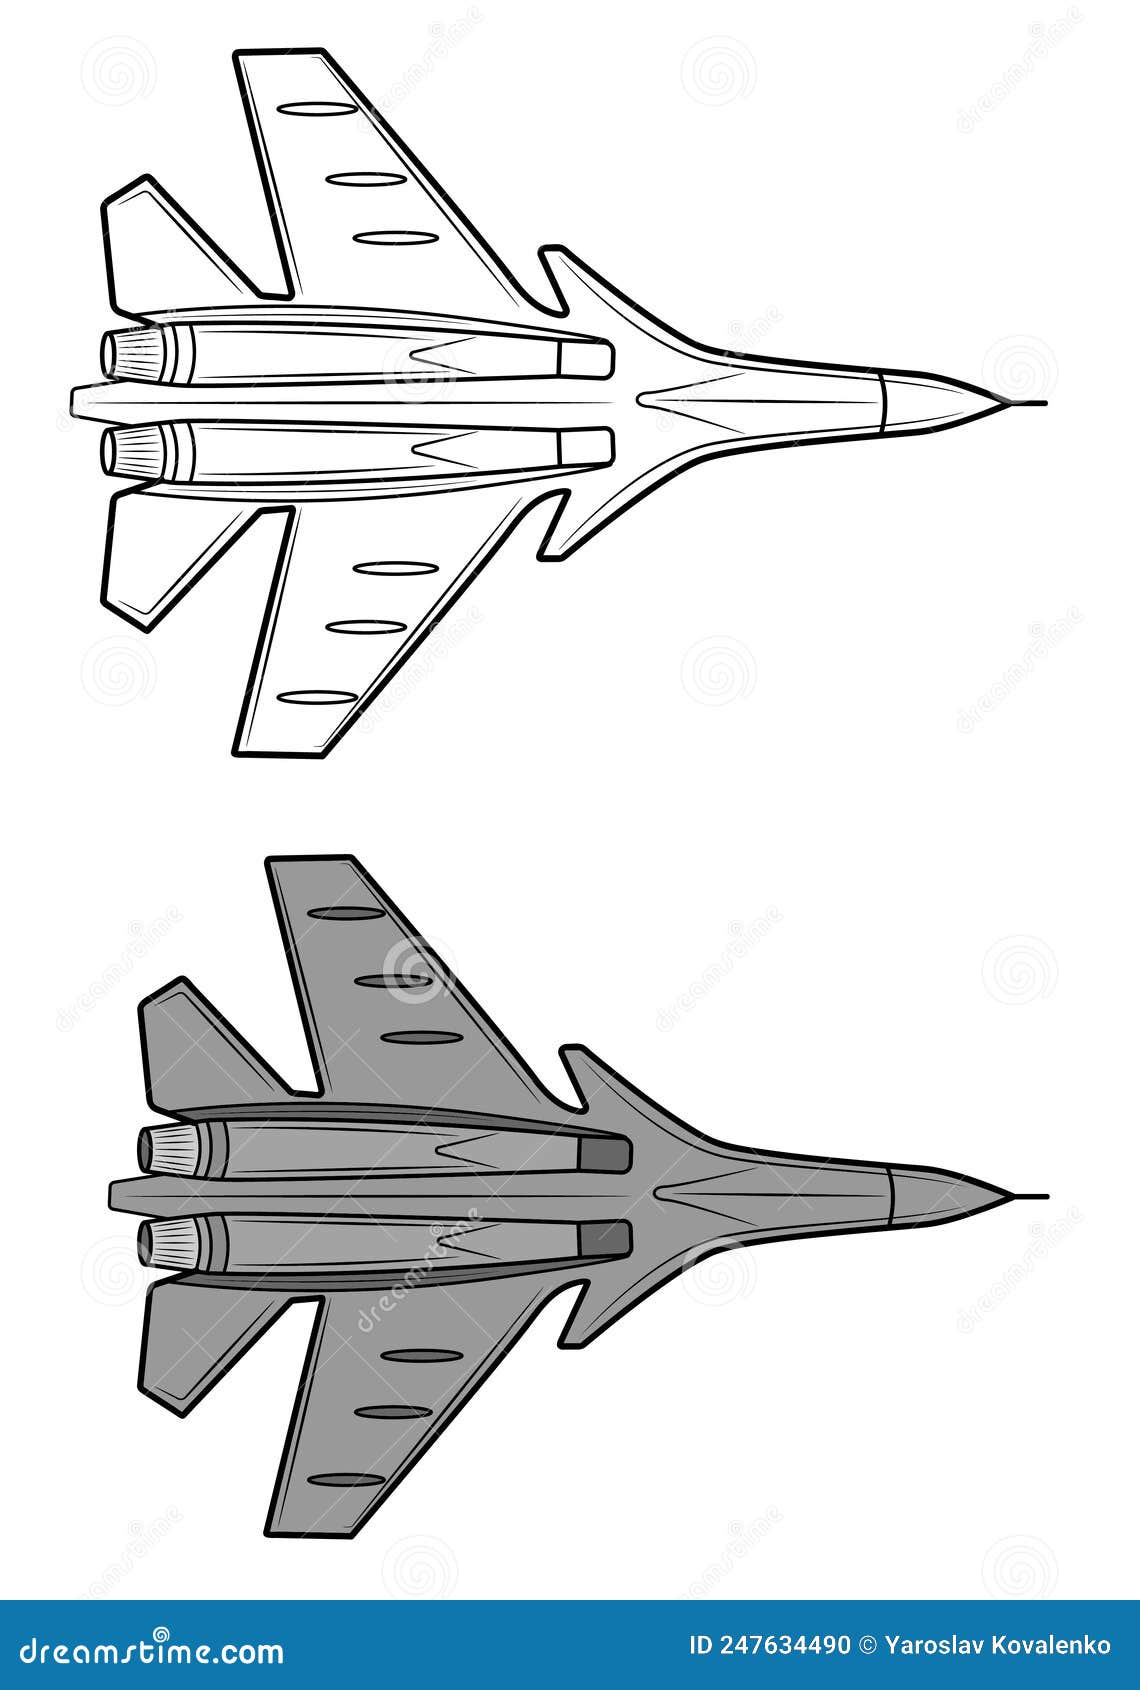 4330 Airplane Coloring Page Images Stock Photos  Vectors  Shutterstock